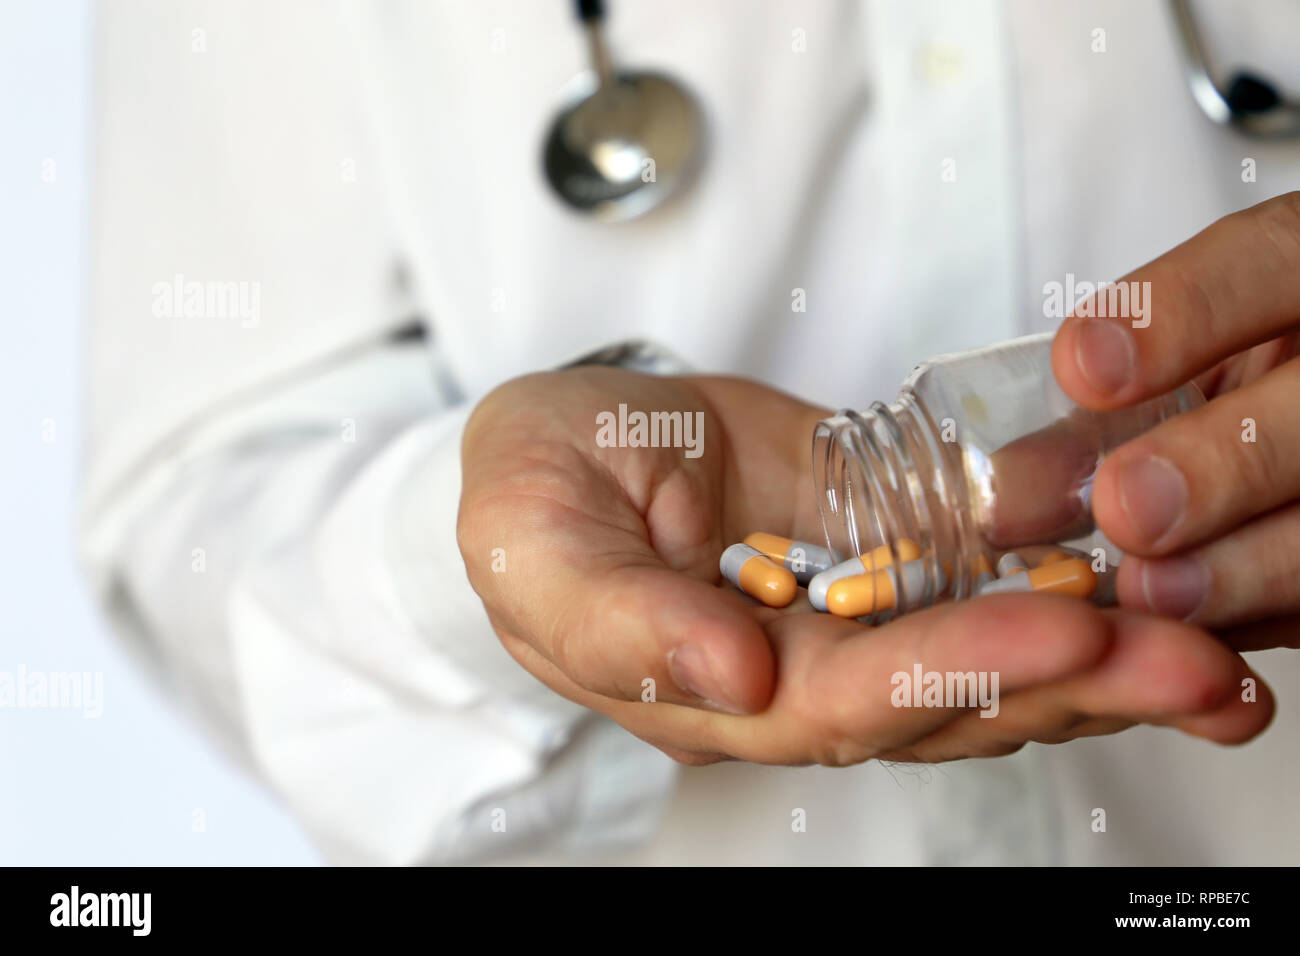 Doctor with bottle of pills, man giving medication in capsules. Concept of medical exam, dose of drugs, vitamins, medical prescription, pharmacy Stock Photo